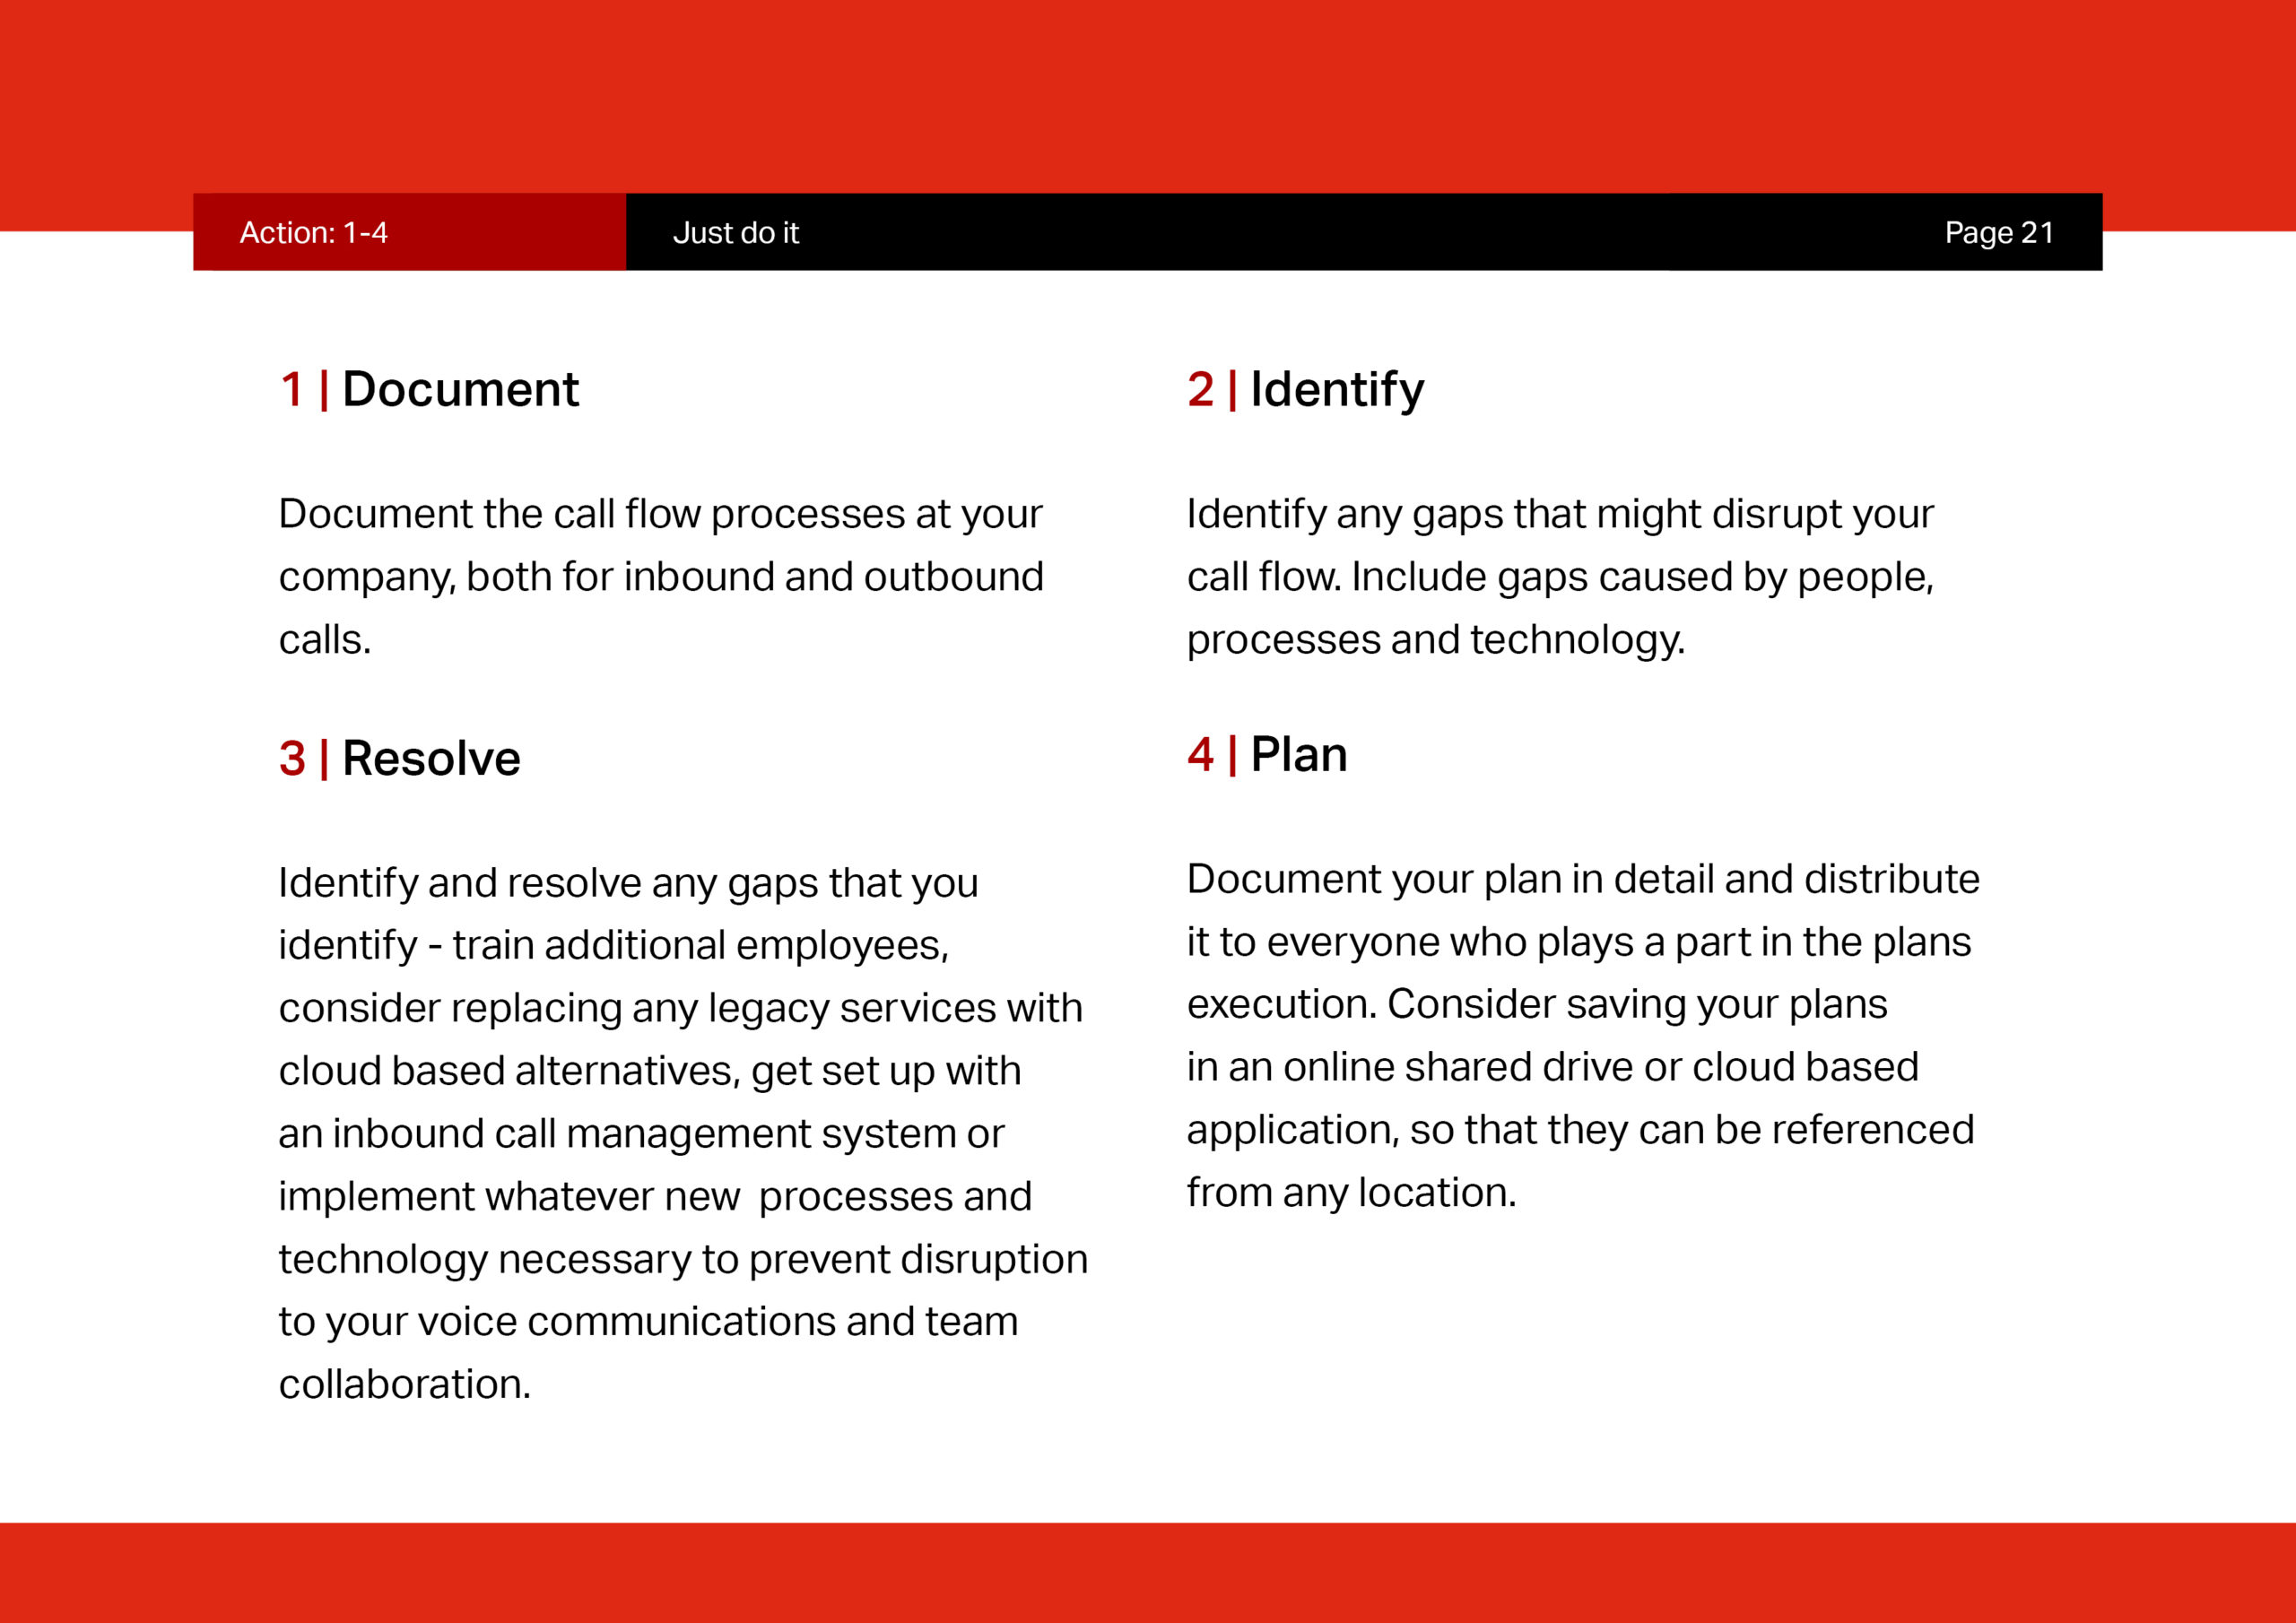 Your disaster recovery plan Page 21